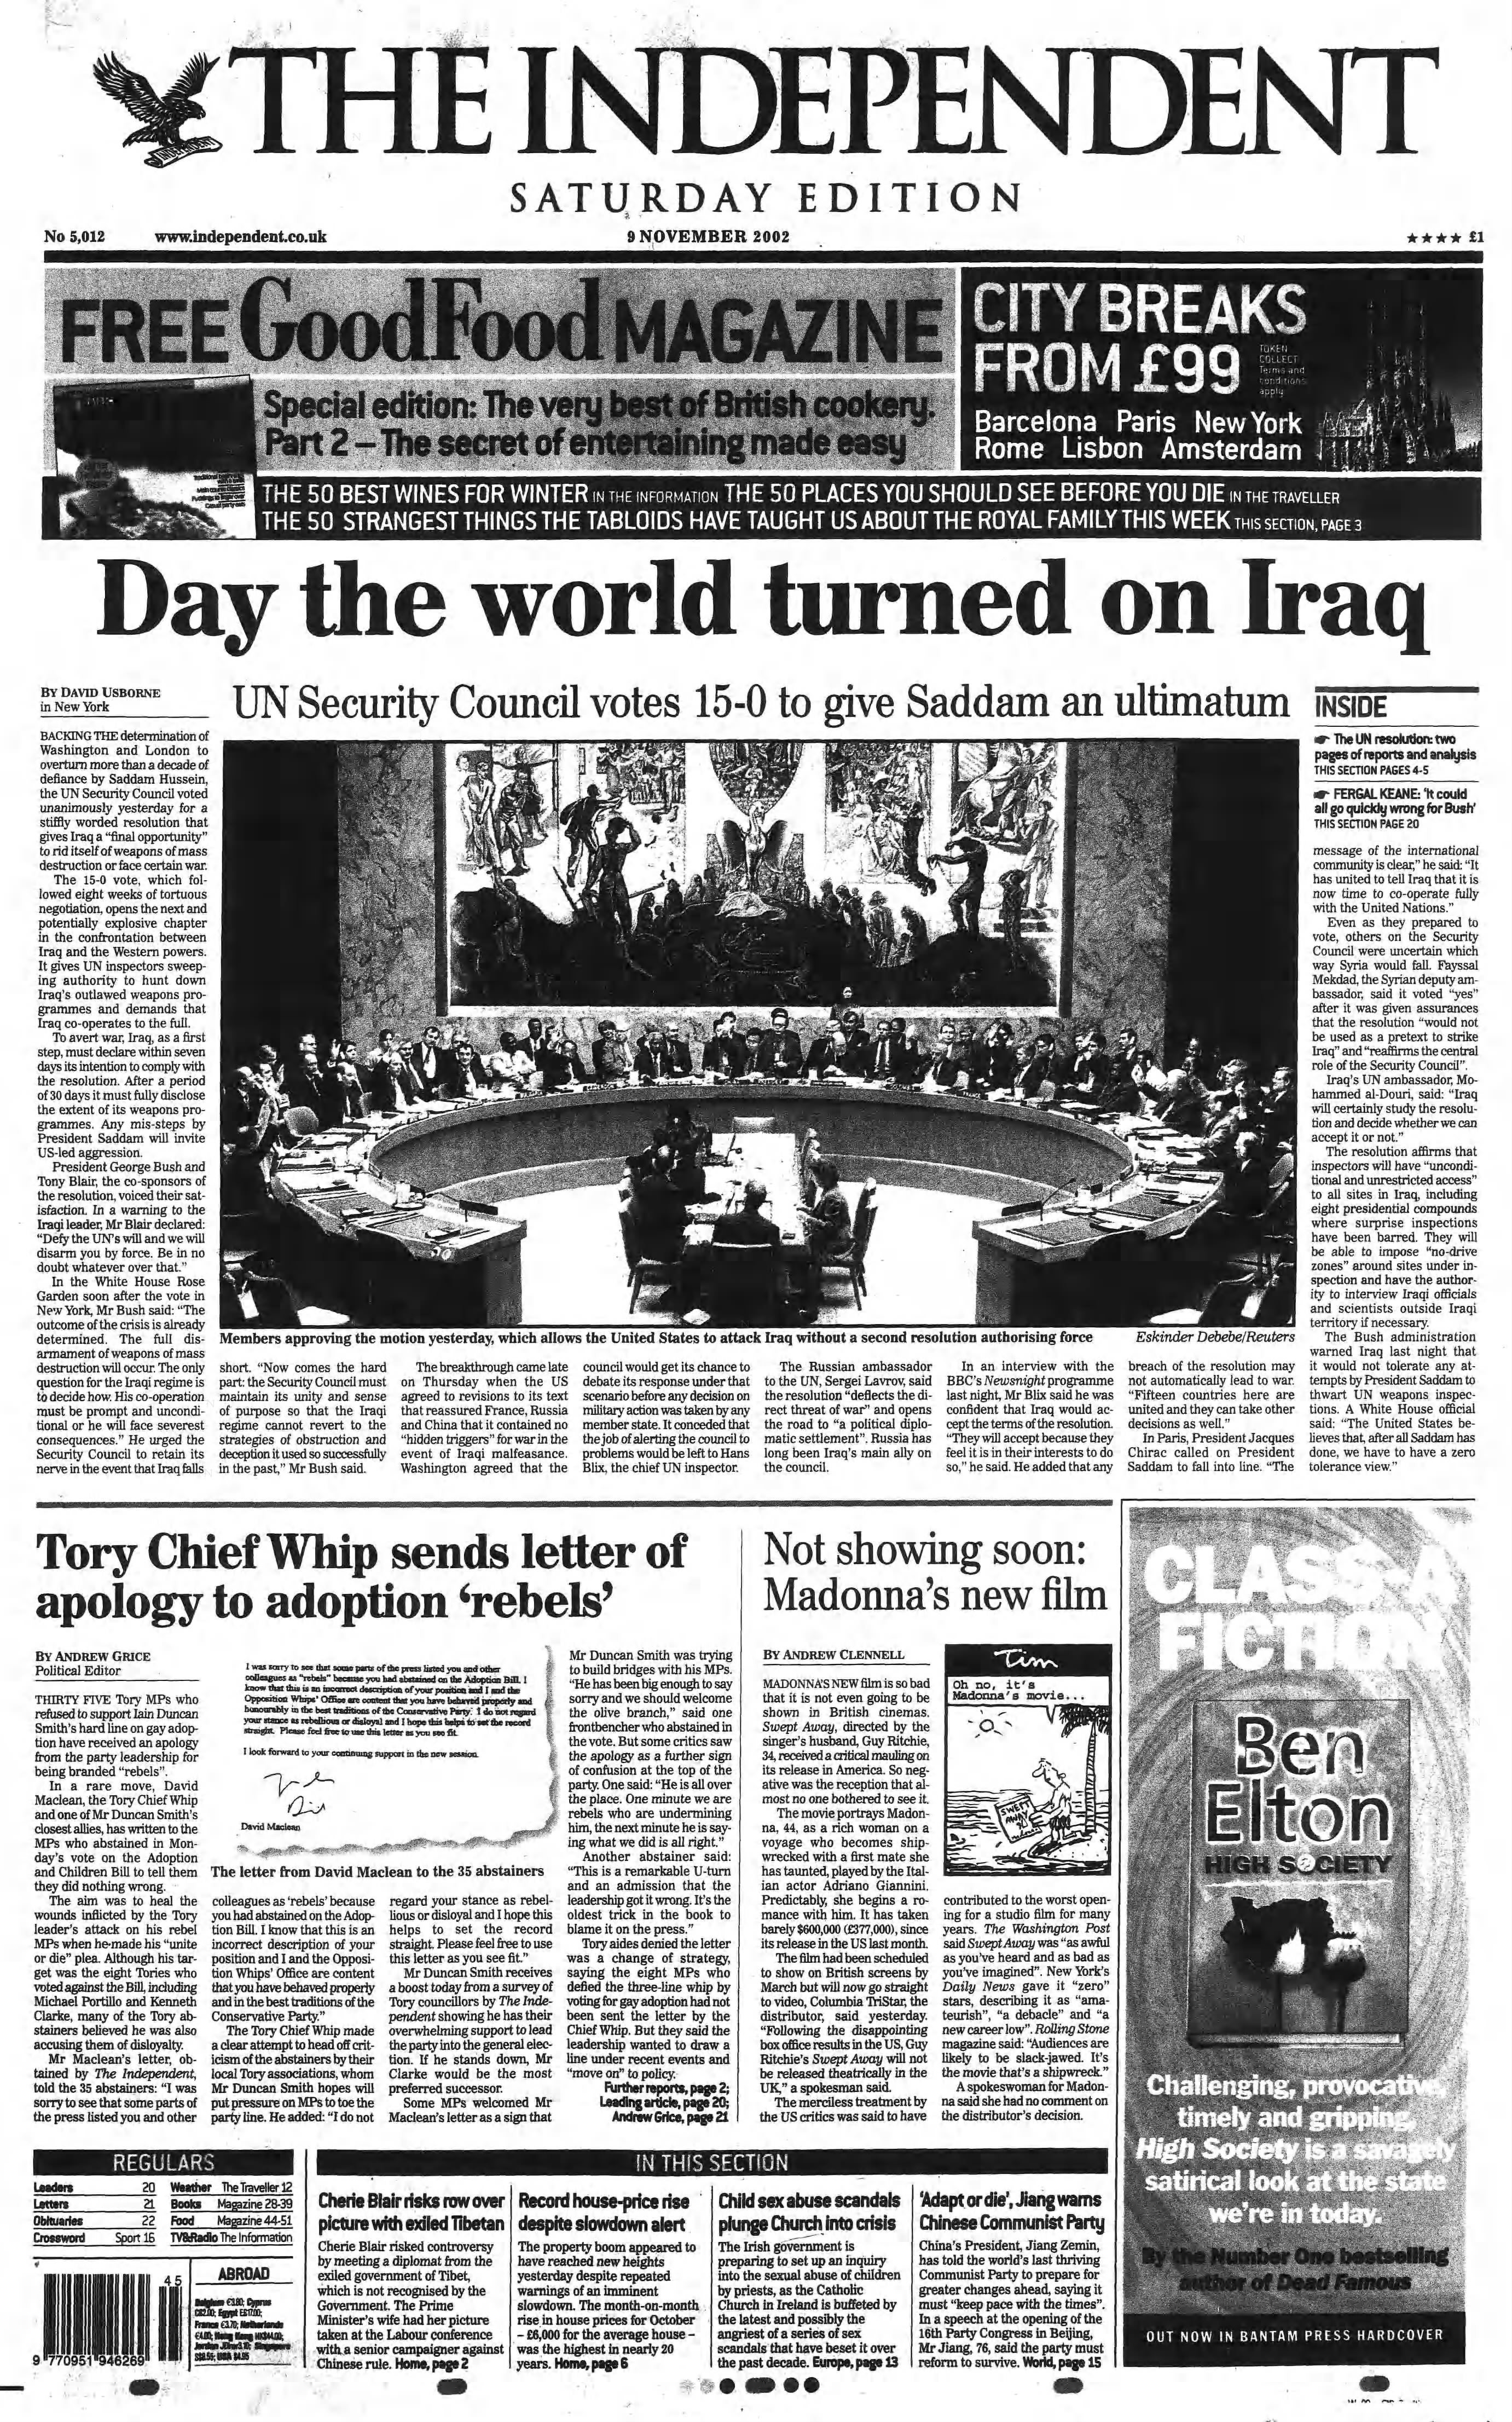 The Independent front page on 9 November 2002